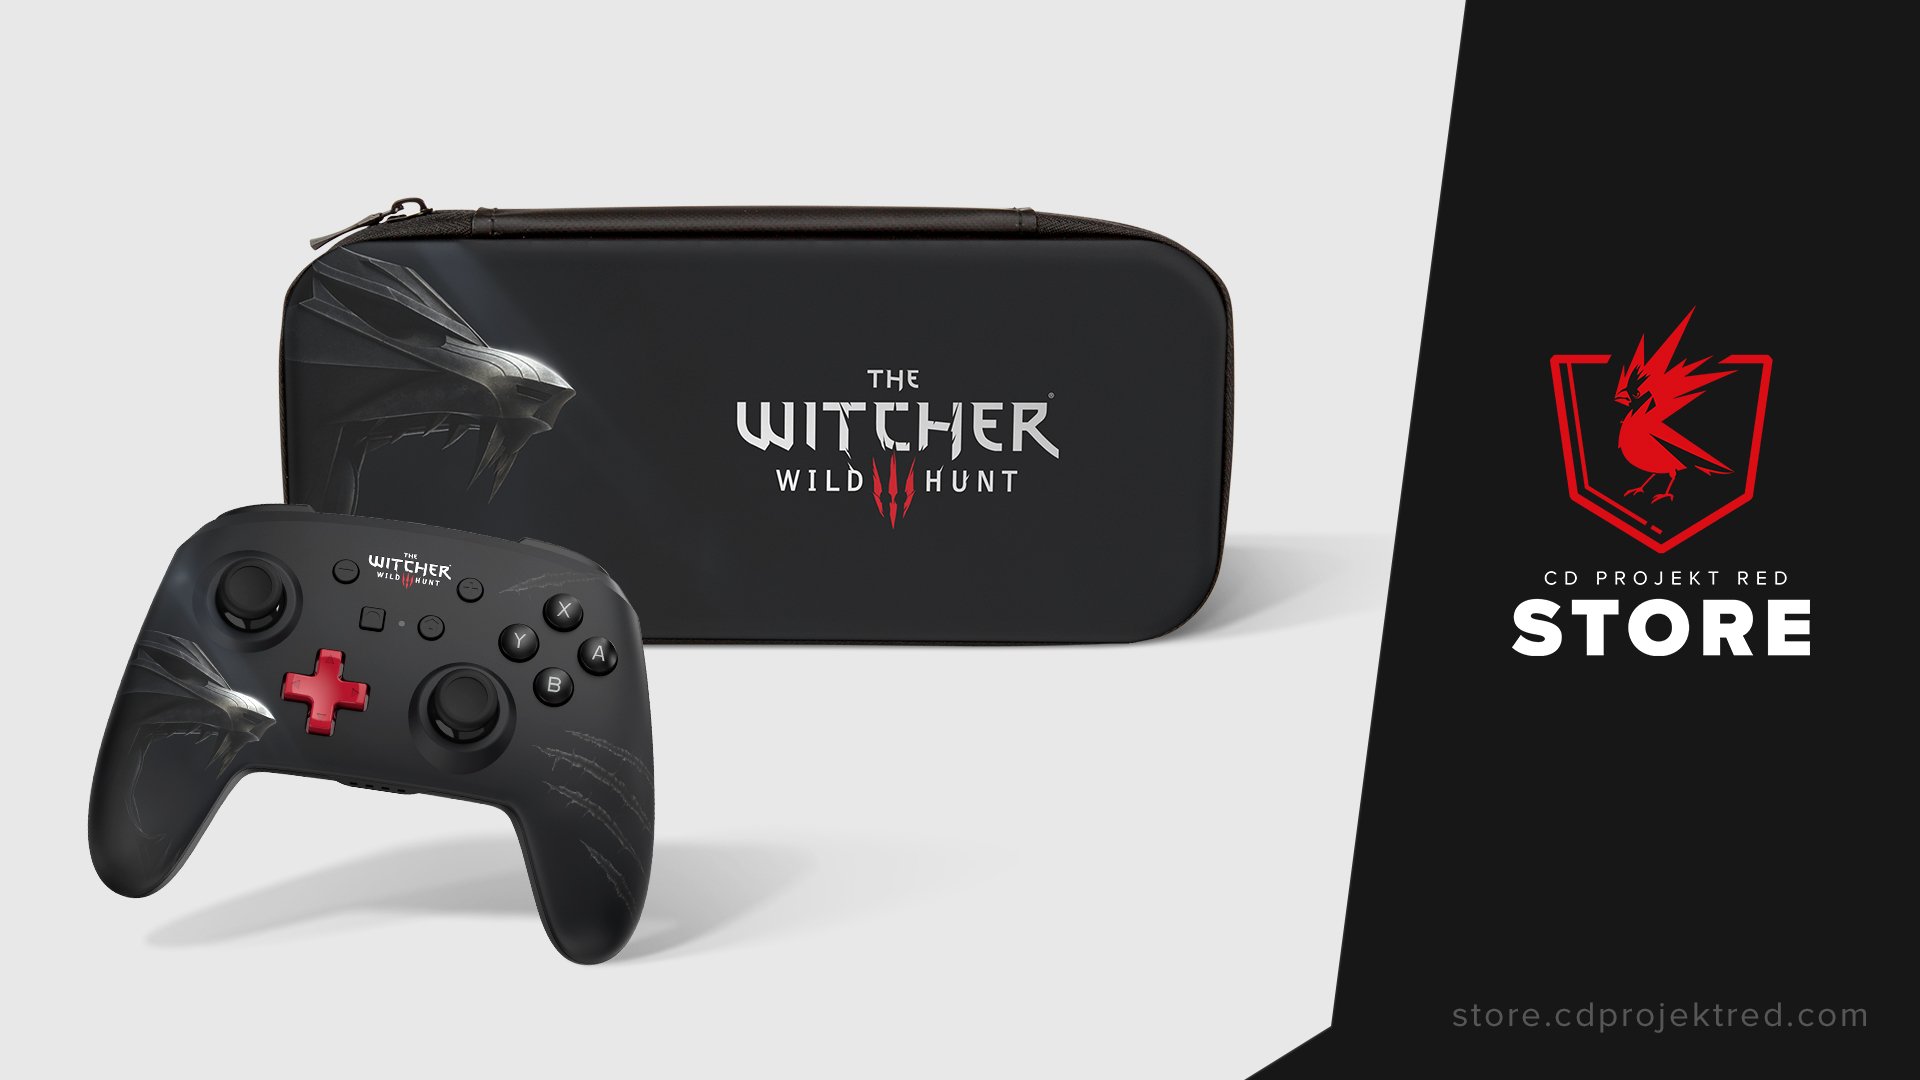 The Witcher on Twitter: "If witchers had the chance to play games on  #NintendoSwitch, they'd most definitely choose a gamepad and case like  these. Get yours now from #CDPRstore! 🇺🇸 https://t.co/IKV4hISaqX 🇺🇸